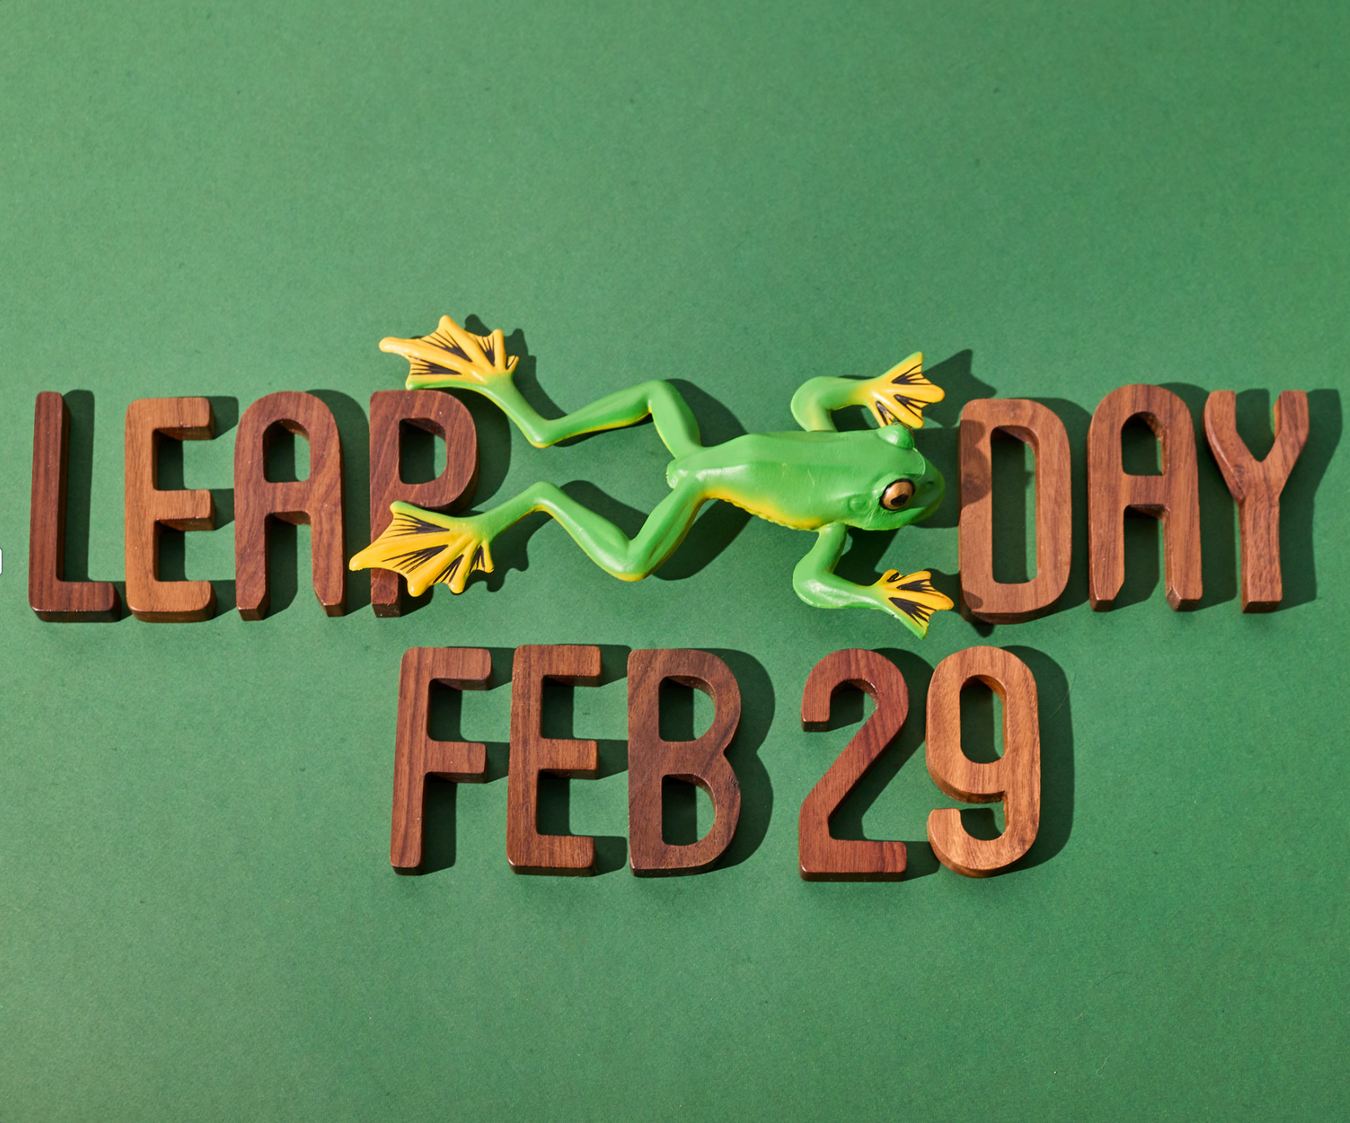 "Leap Day" February 29th Specials